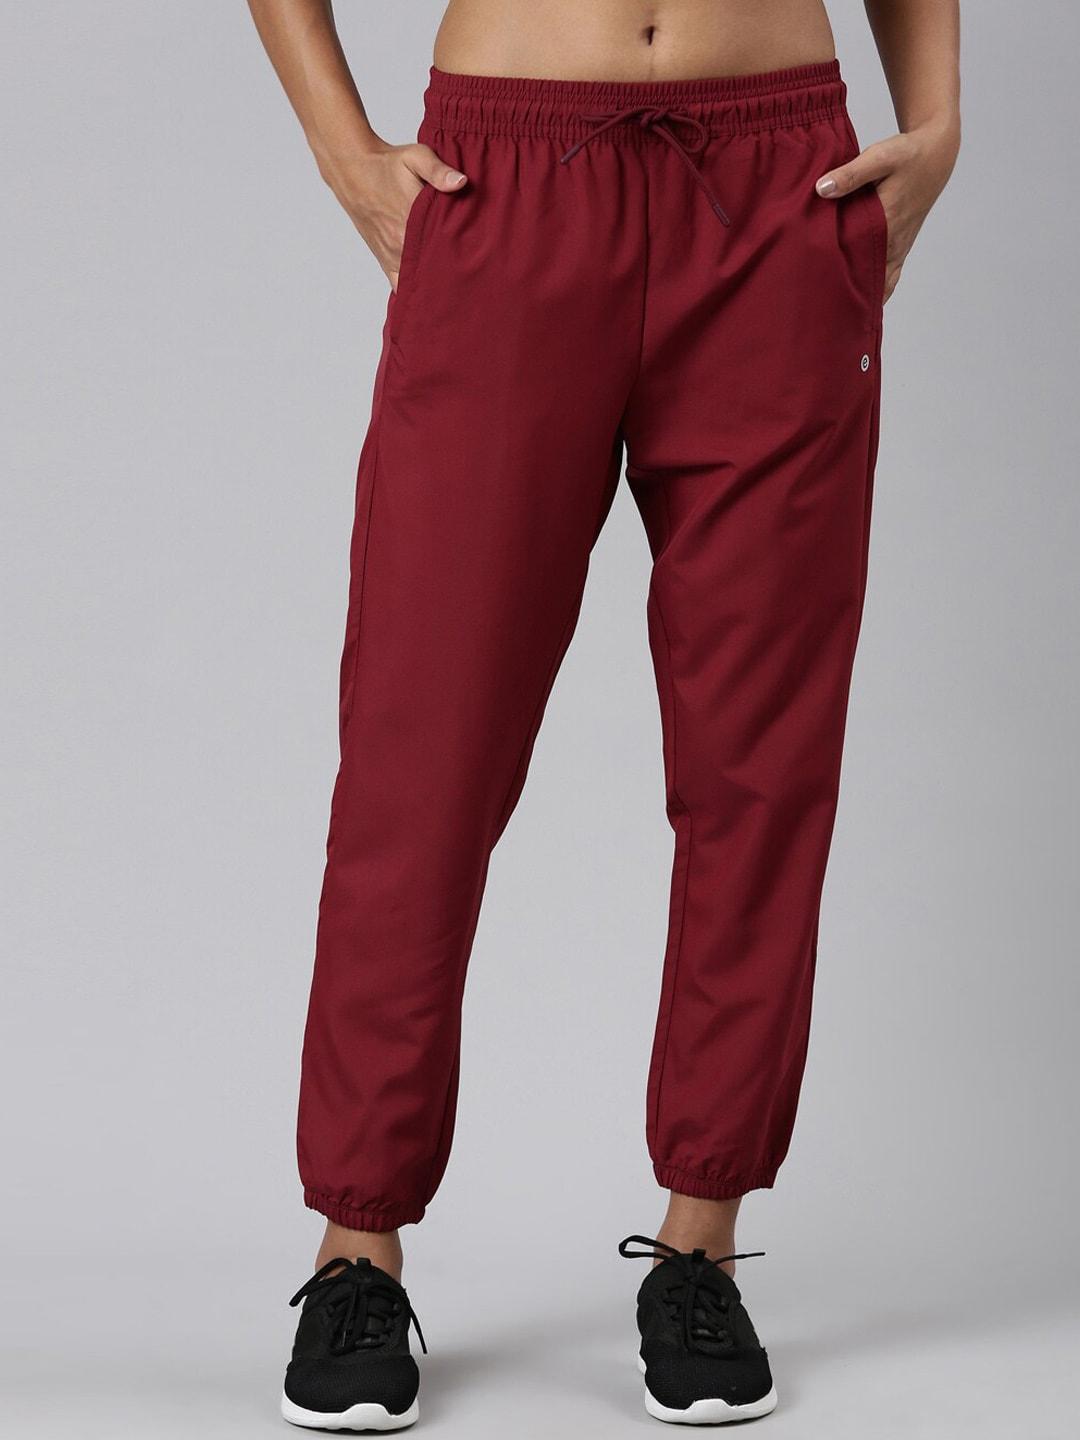 enamor-women-relaxed-fit-mid-rise-sports-joggers